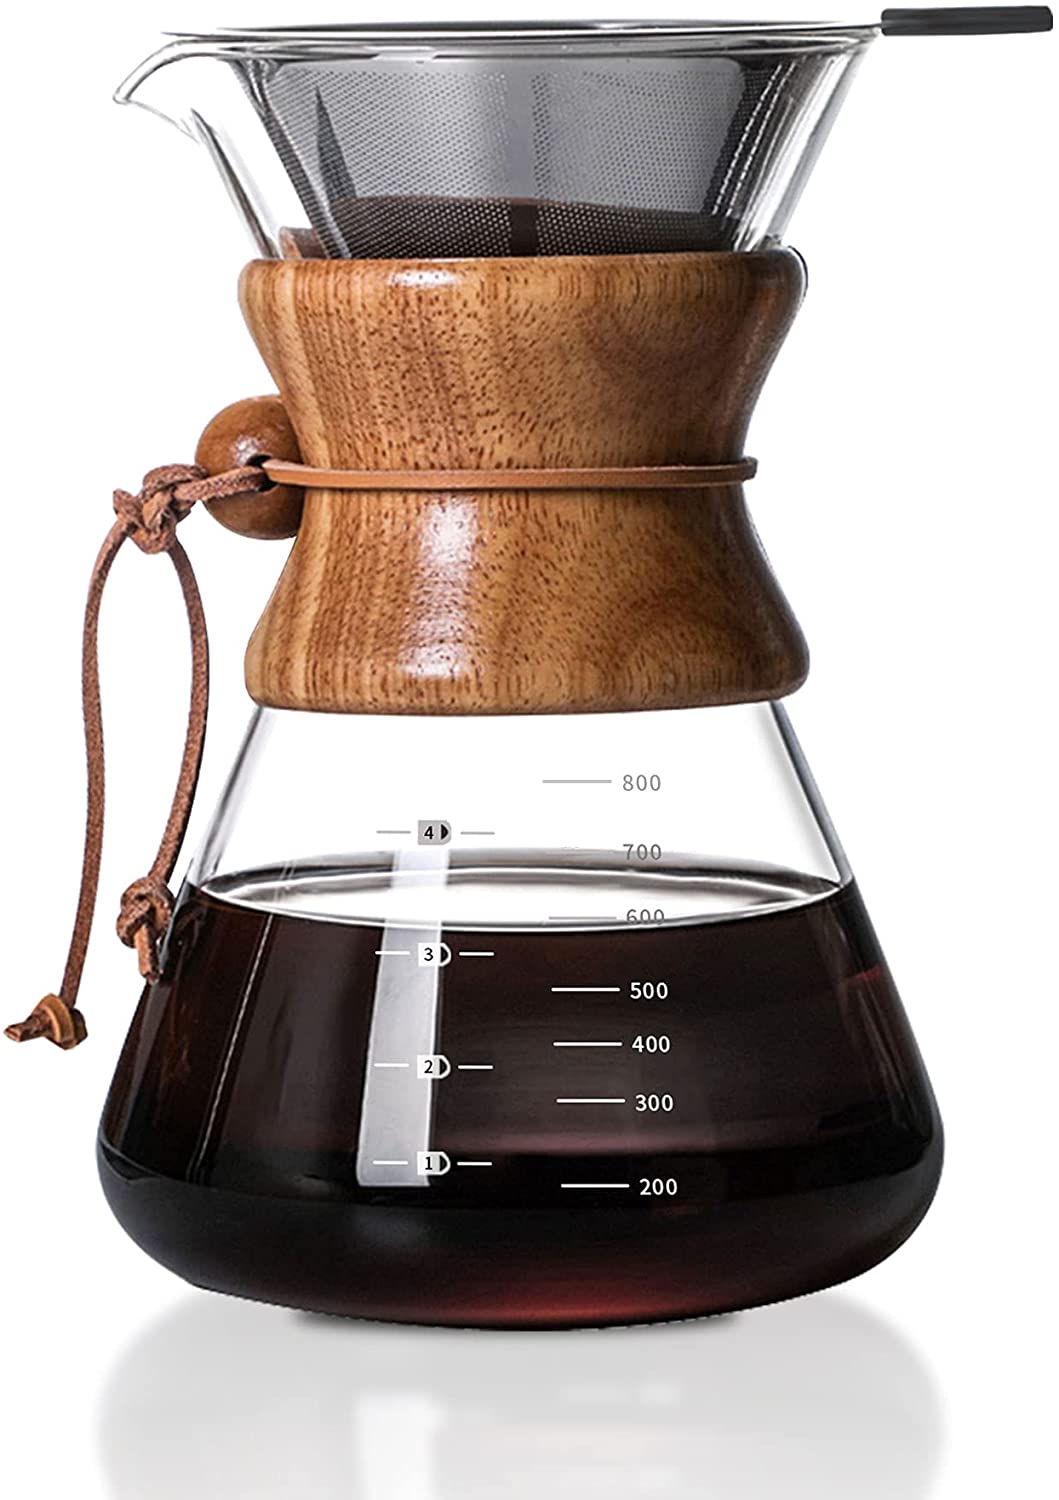 ISKM Manual Pour Over Coffee Maker Coffee Maker Coffee Maker Carafe Coffee 